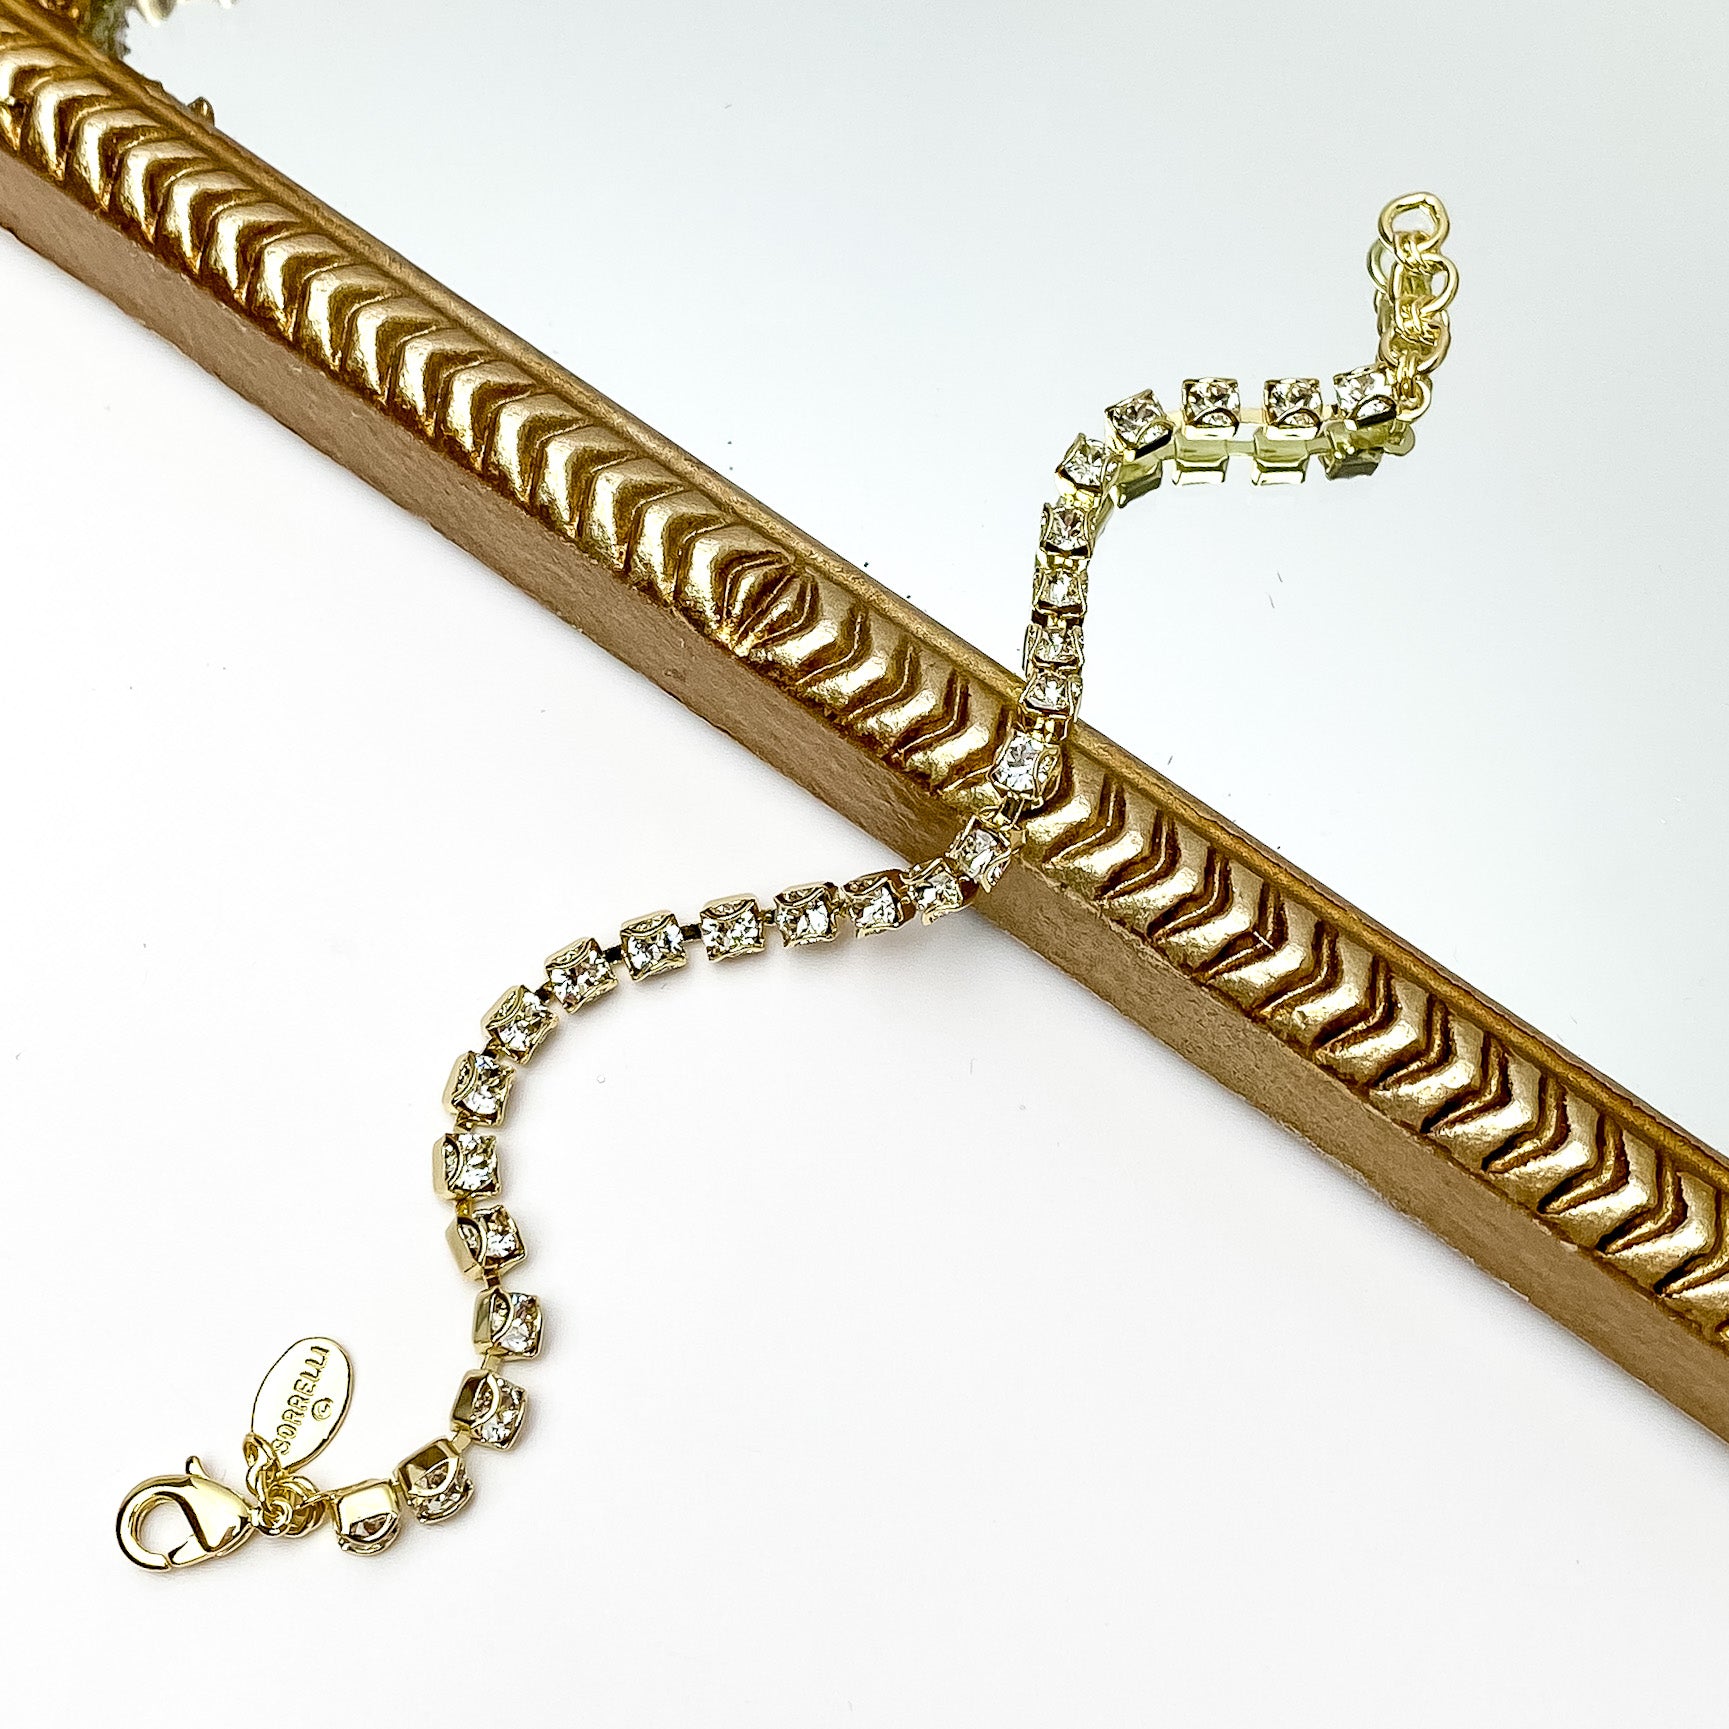 Gold tennis bracelet with clear crystals. Pictured on a white background and a gold frame through the middle.